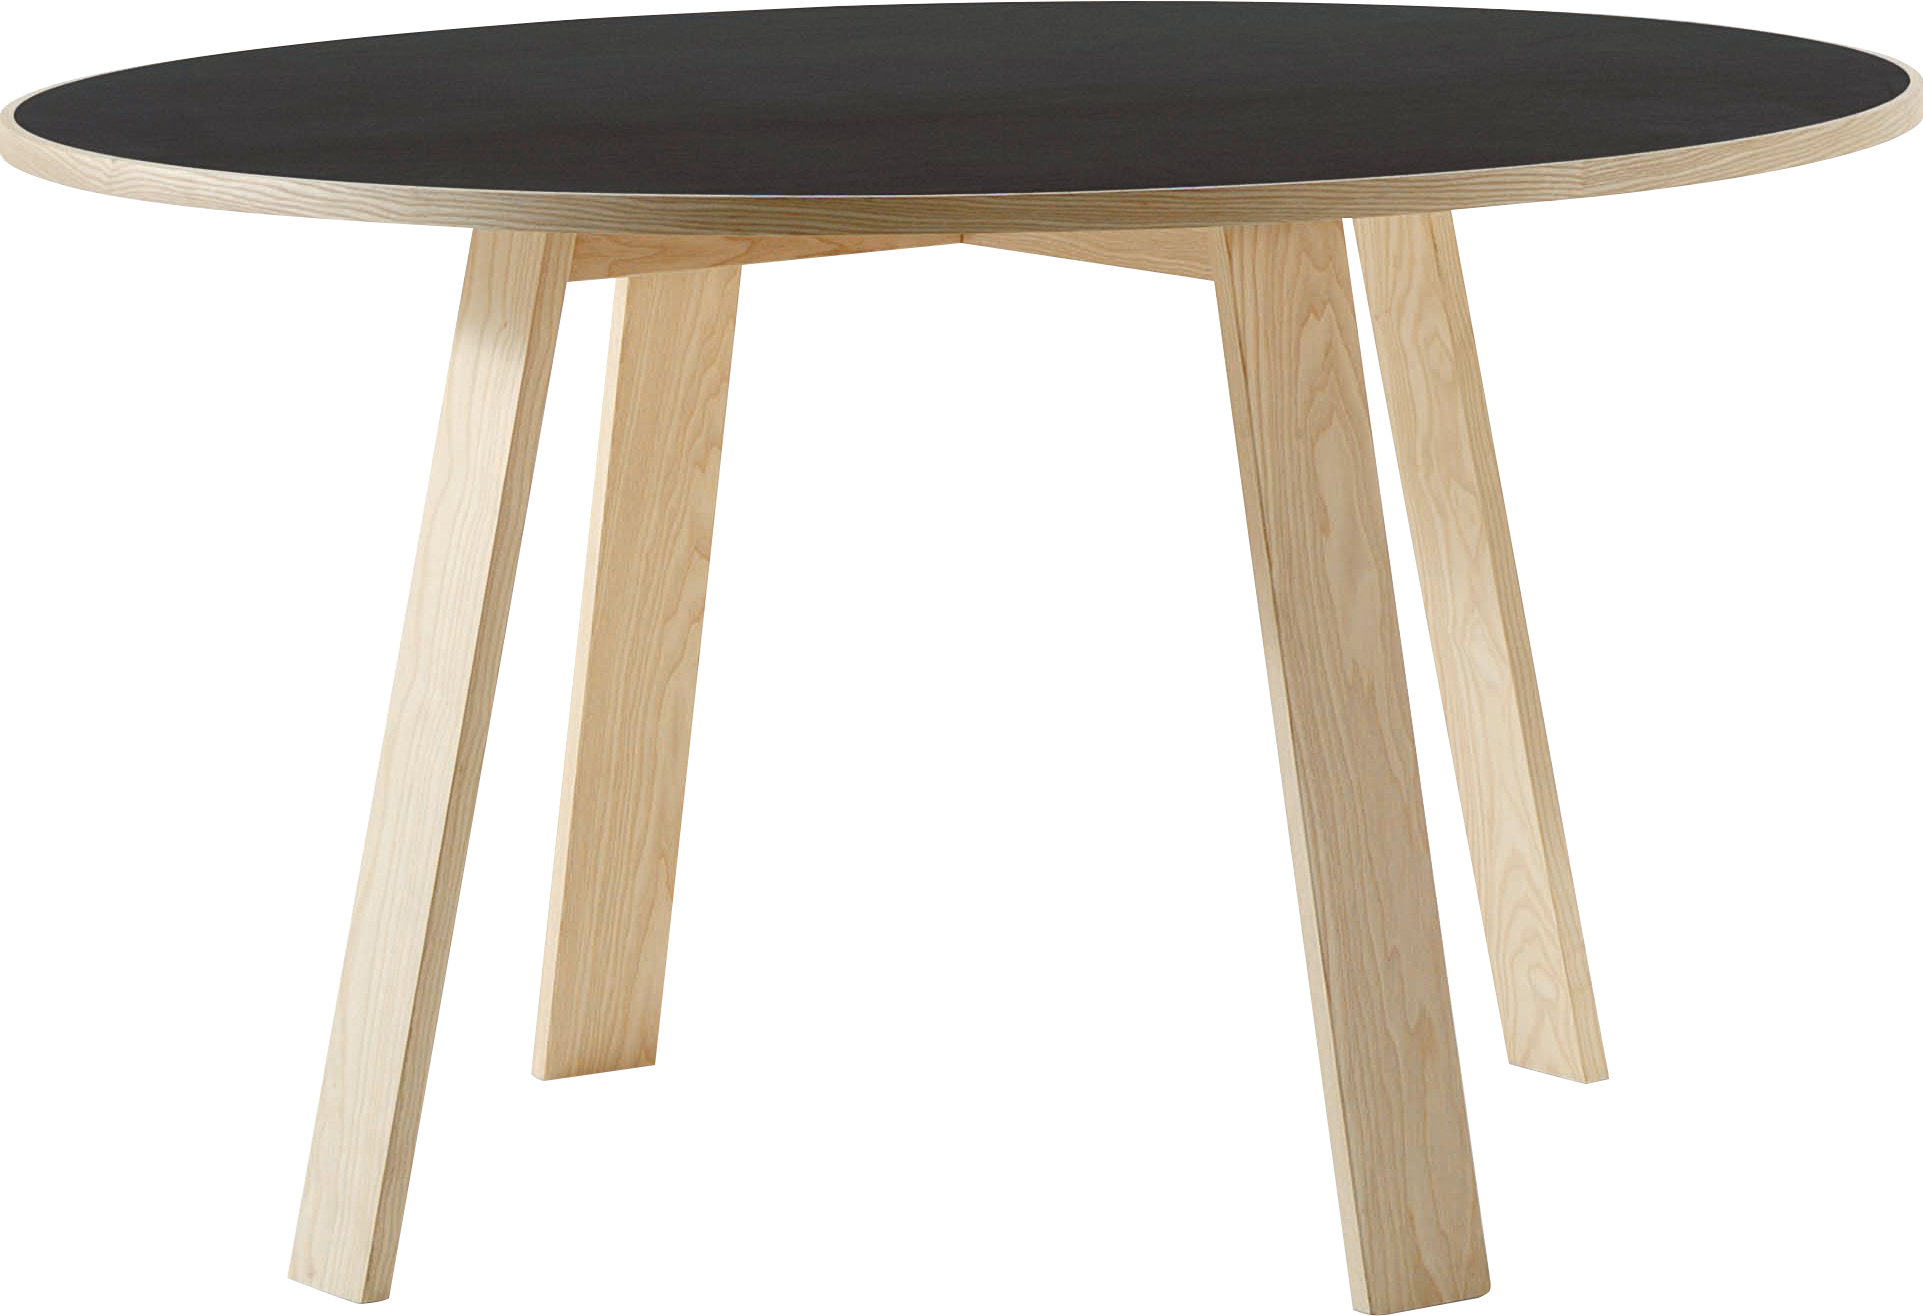 Table Png Image - Table, Transparent background PNG HD thumbnail